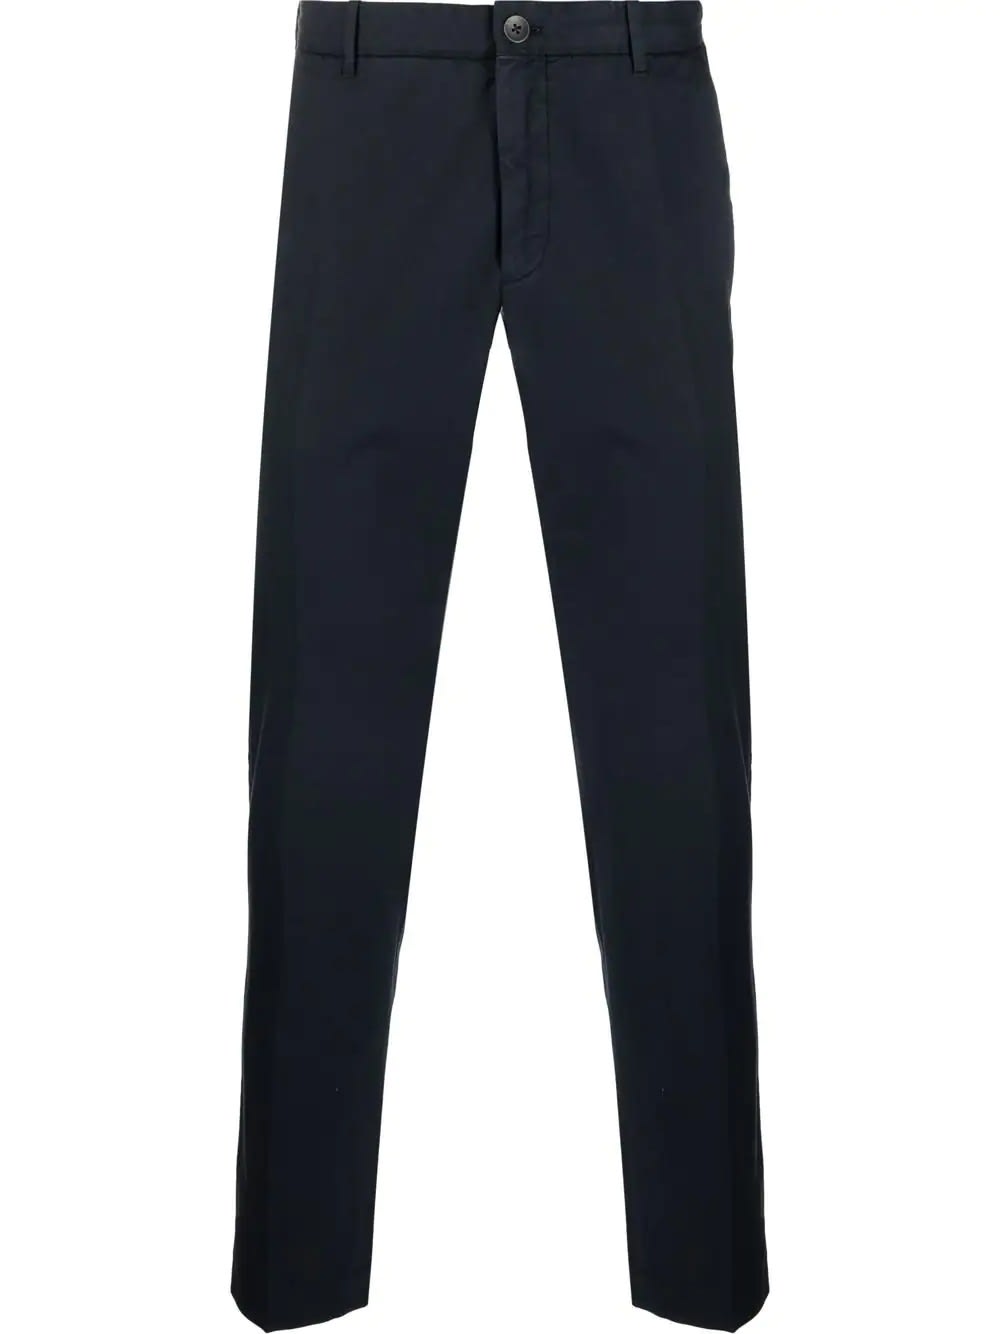 Incotex Man Slim Fit Trousers In Navy Blue Stretch Cotton